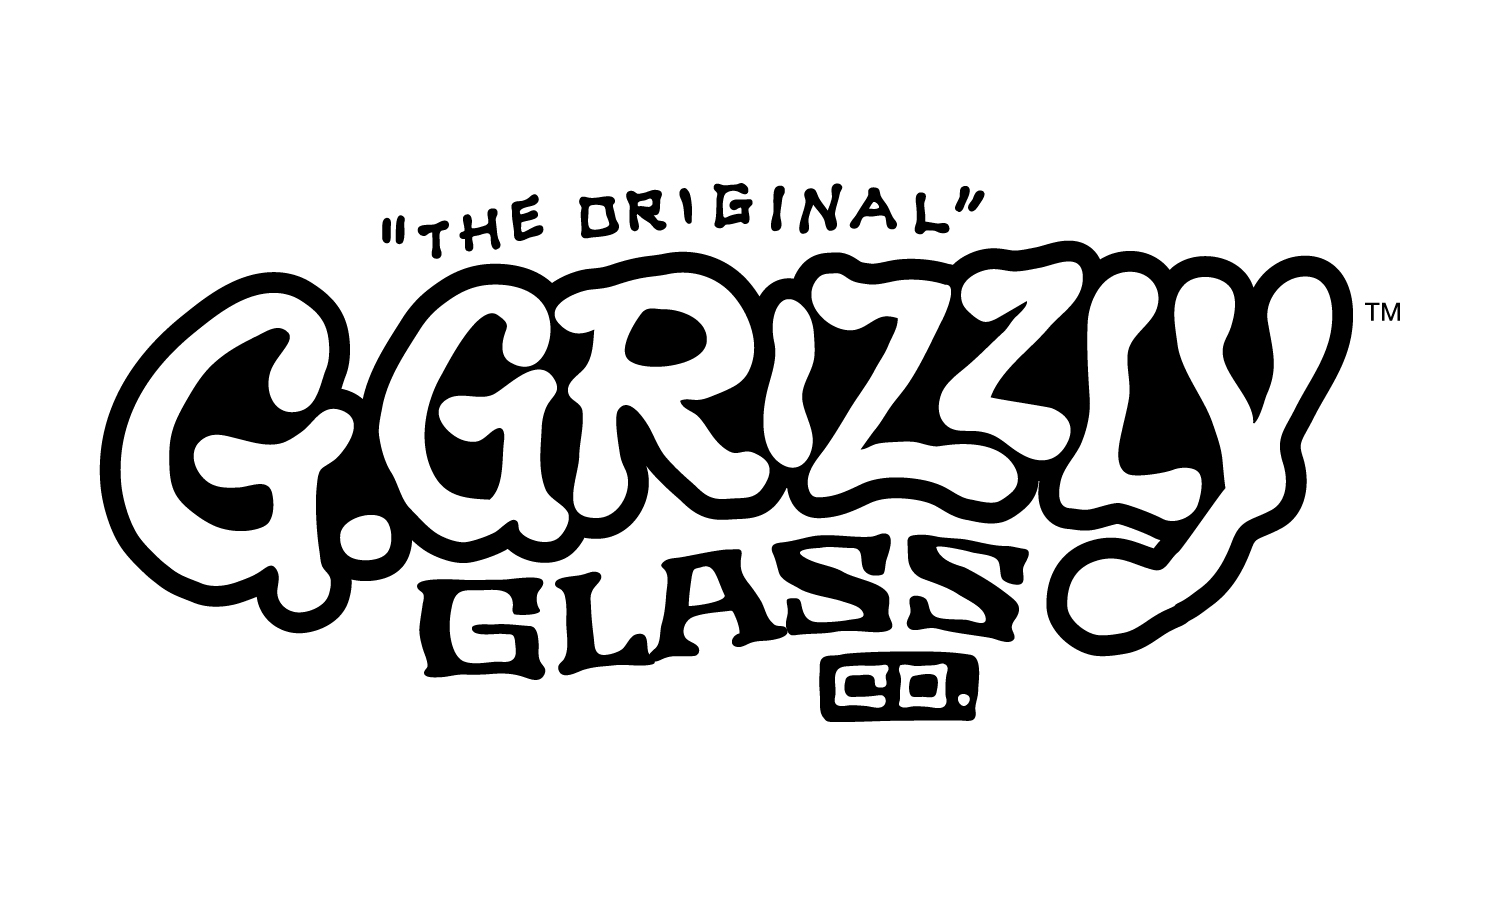 G. Grizzly Glass